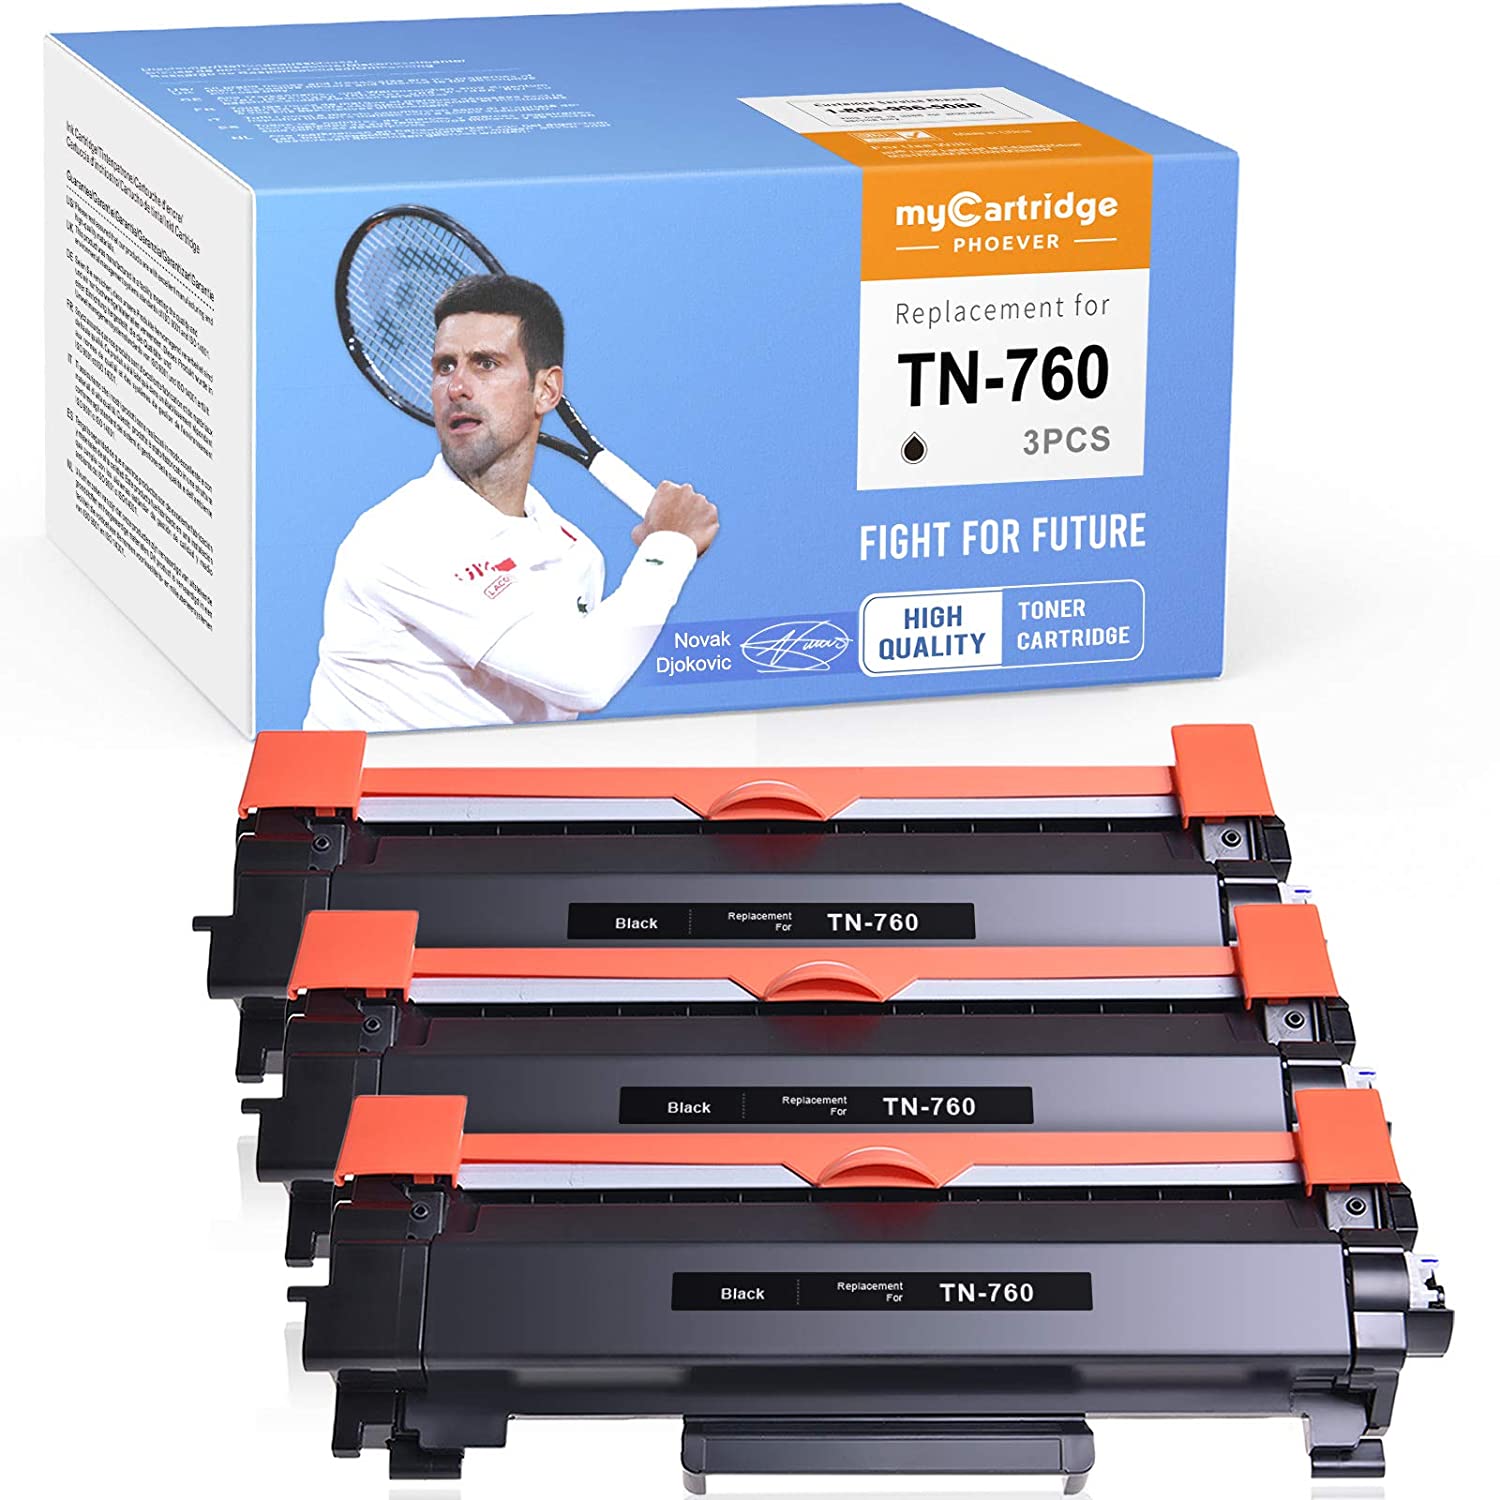 Compatible Toner Cartridge Replacement For Brother Tn760 Tn-760 Tn730 For Hl-2350Dw Mfc-L2710Dw Dcp-L2550Dw Mfc-L2750Dw Hl-L2395Dw Hl-L2370Dw Hl-L2390Dw Printer..